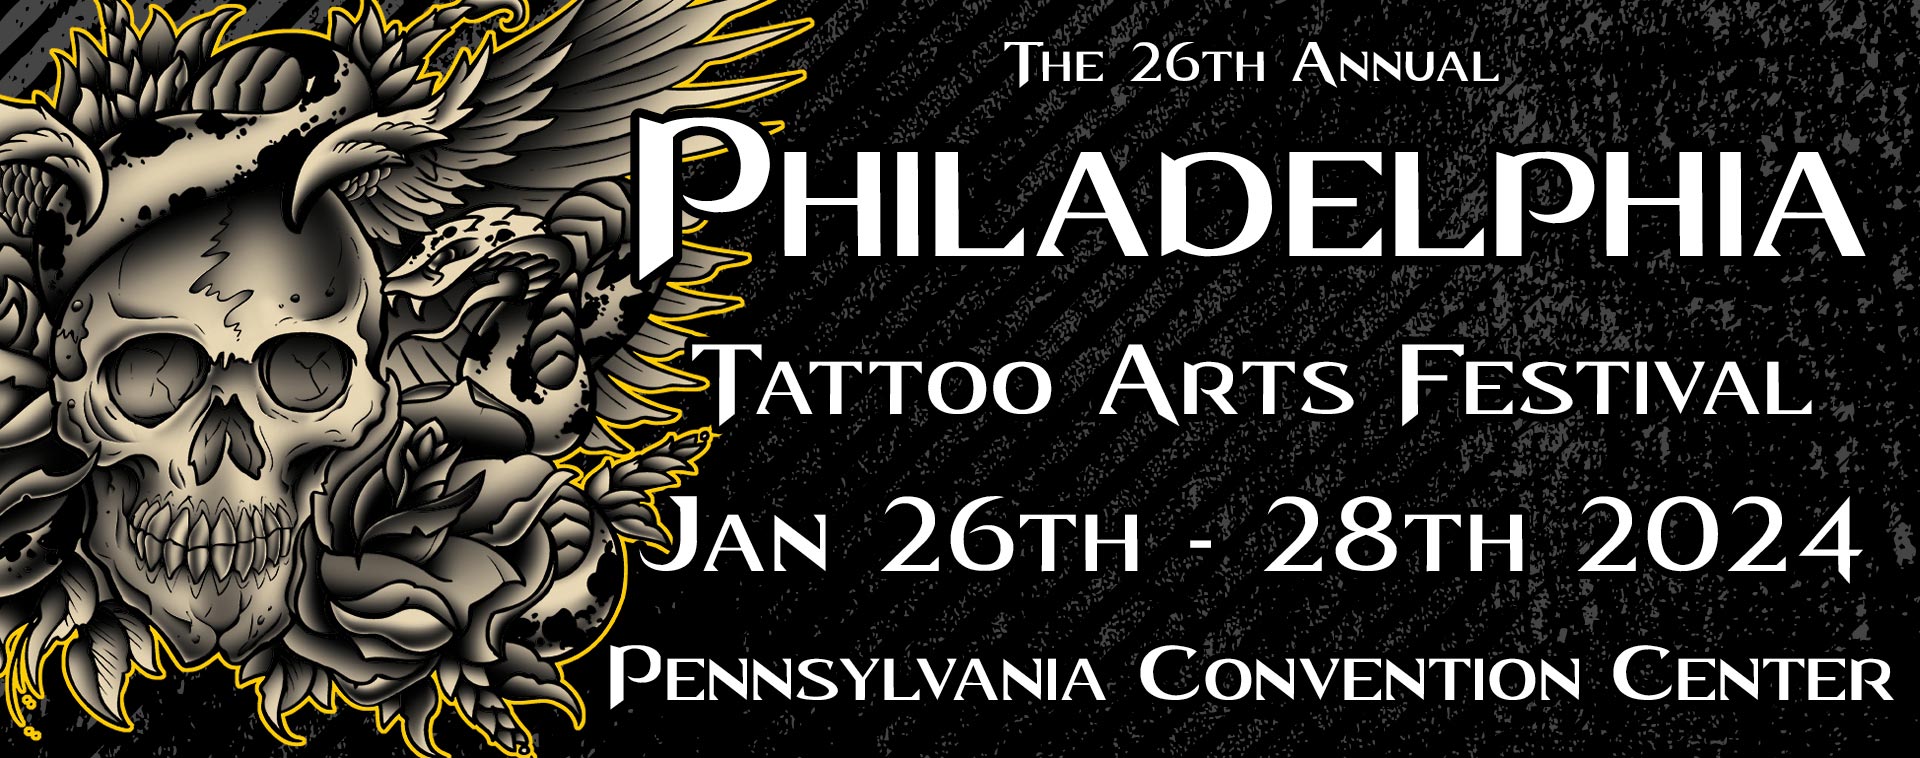 Upcoming Tattoo Conventions Calendar 2022  2023  World Tattoo Events